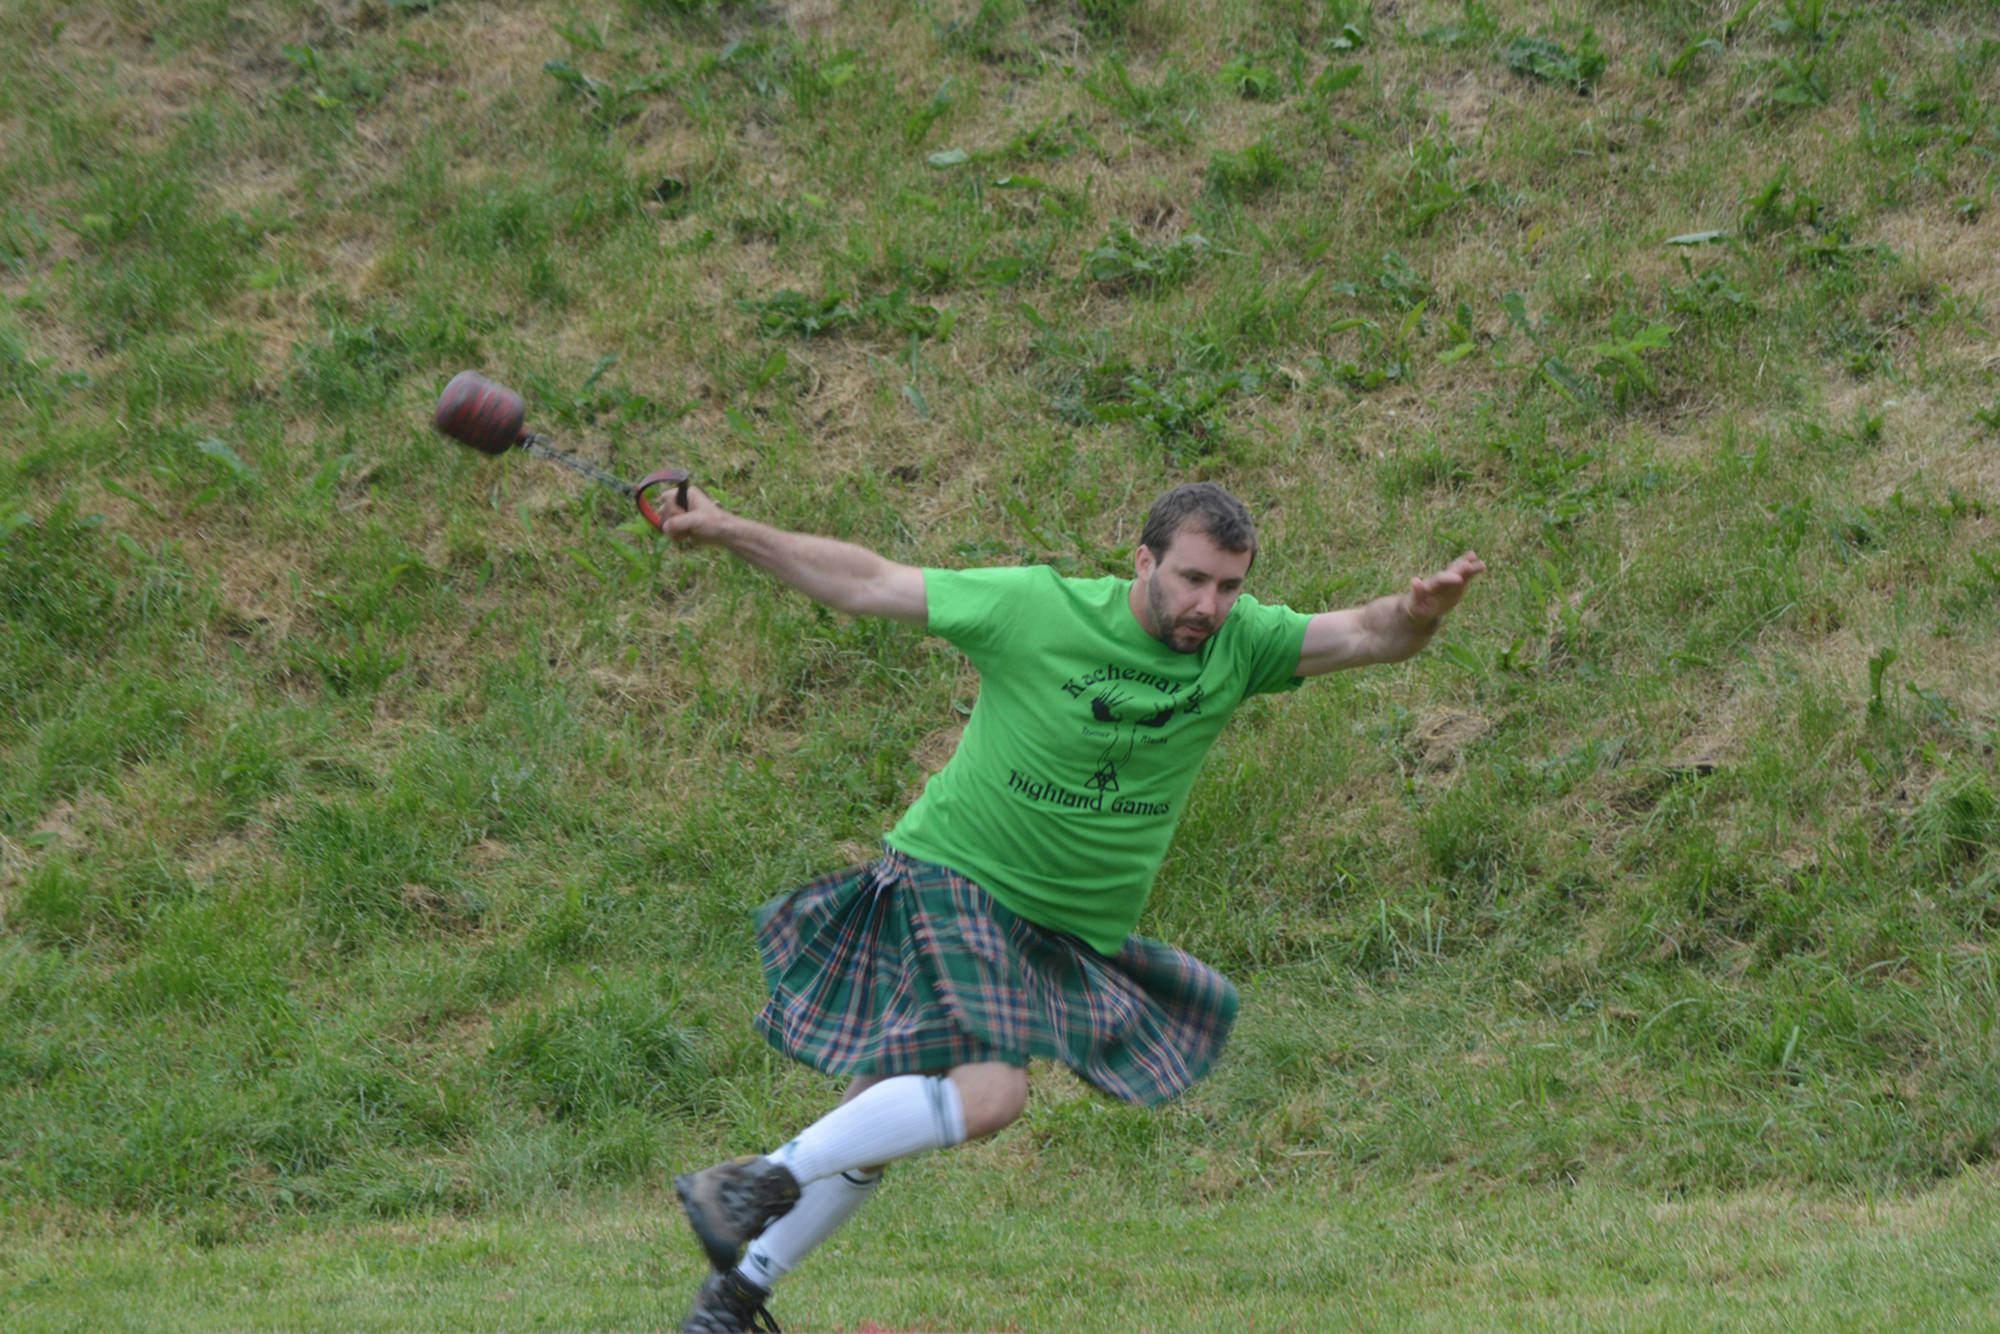 Highland Games are Saturday